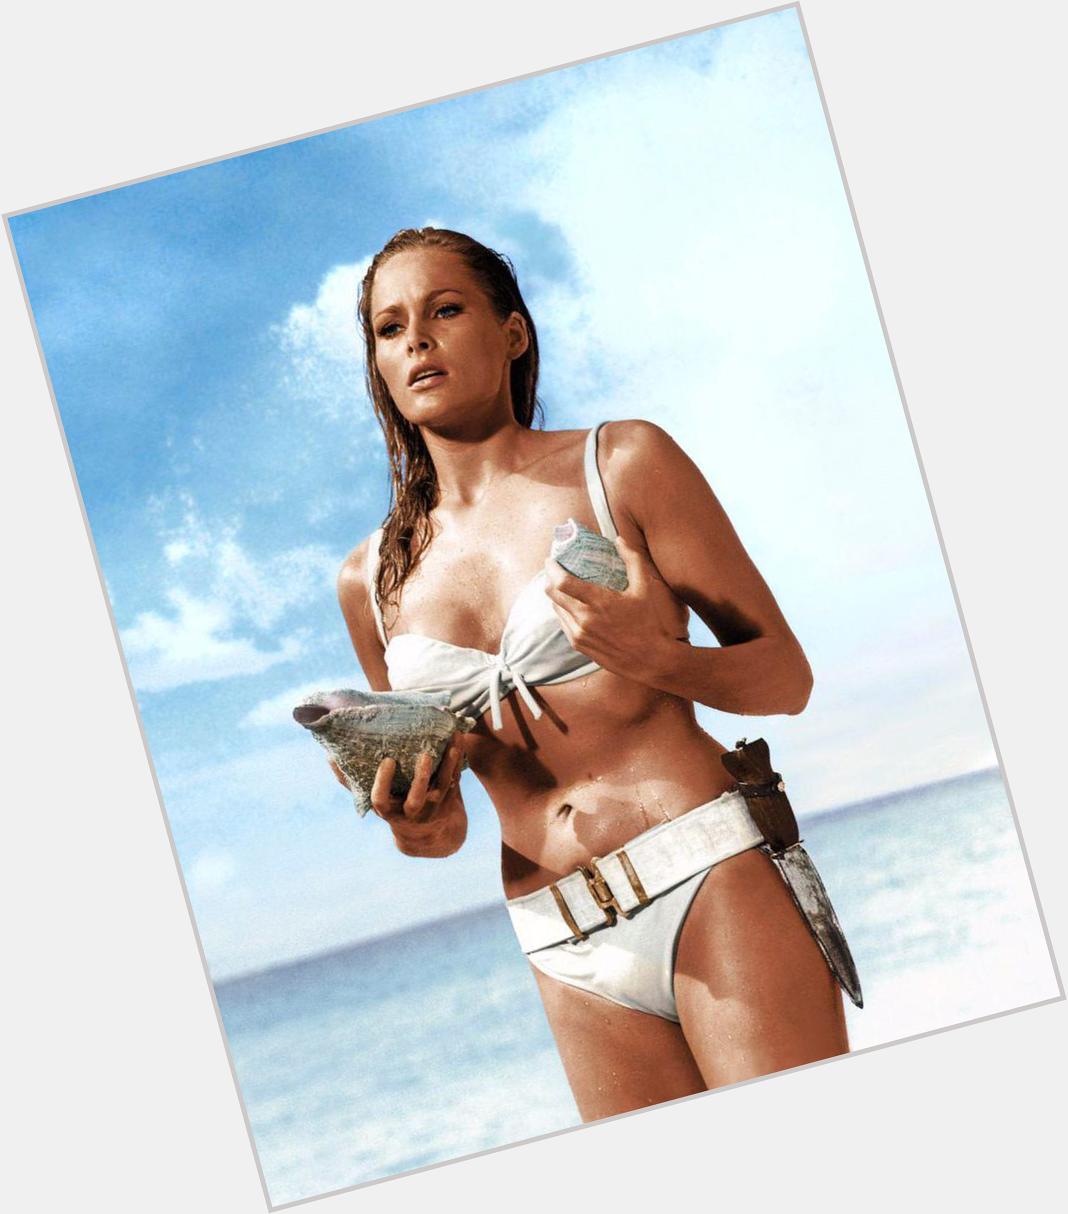 Happy 79th birthday today March 19th to Ursula Andress. 